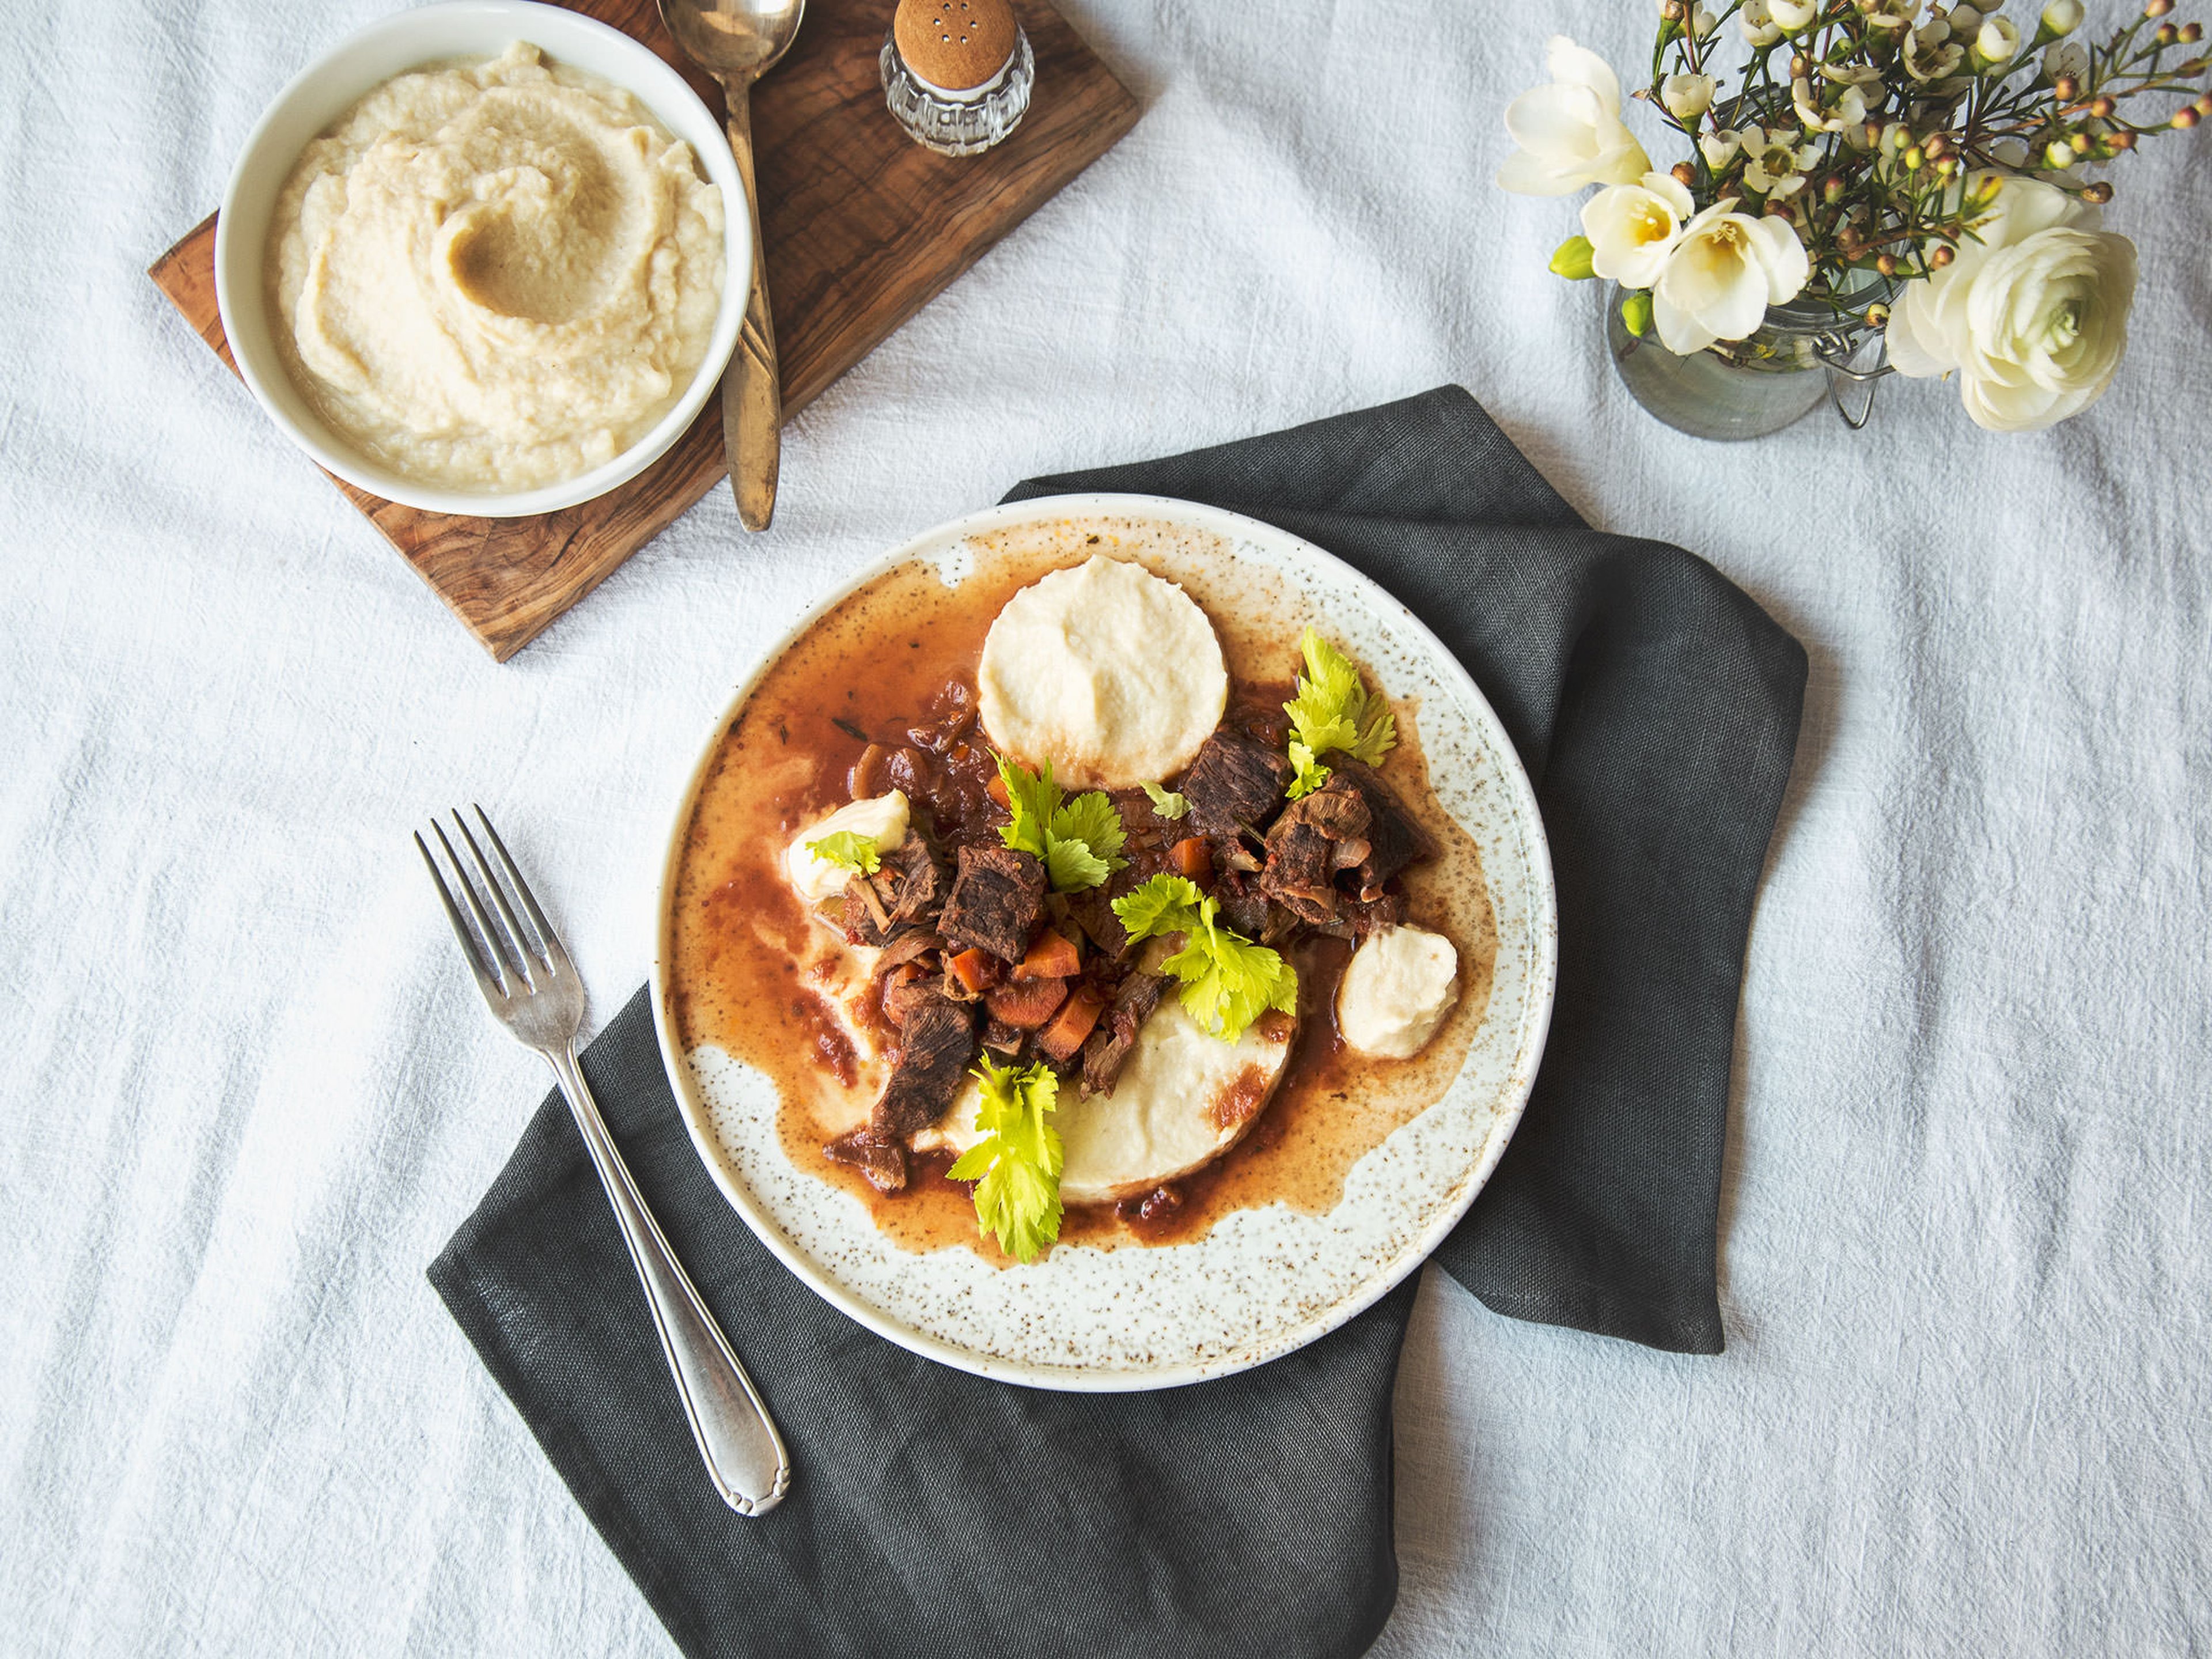 Beef ragout with celery root purée